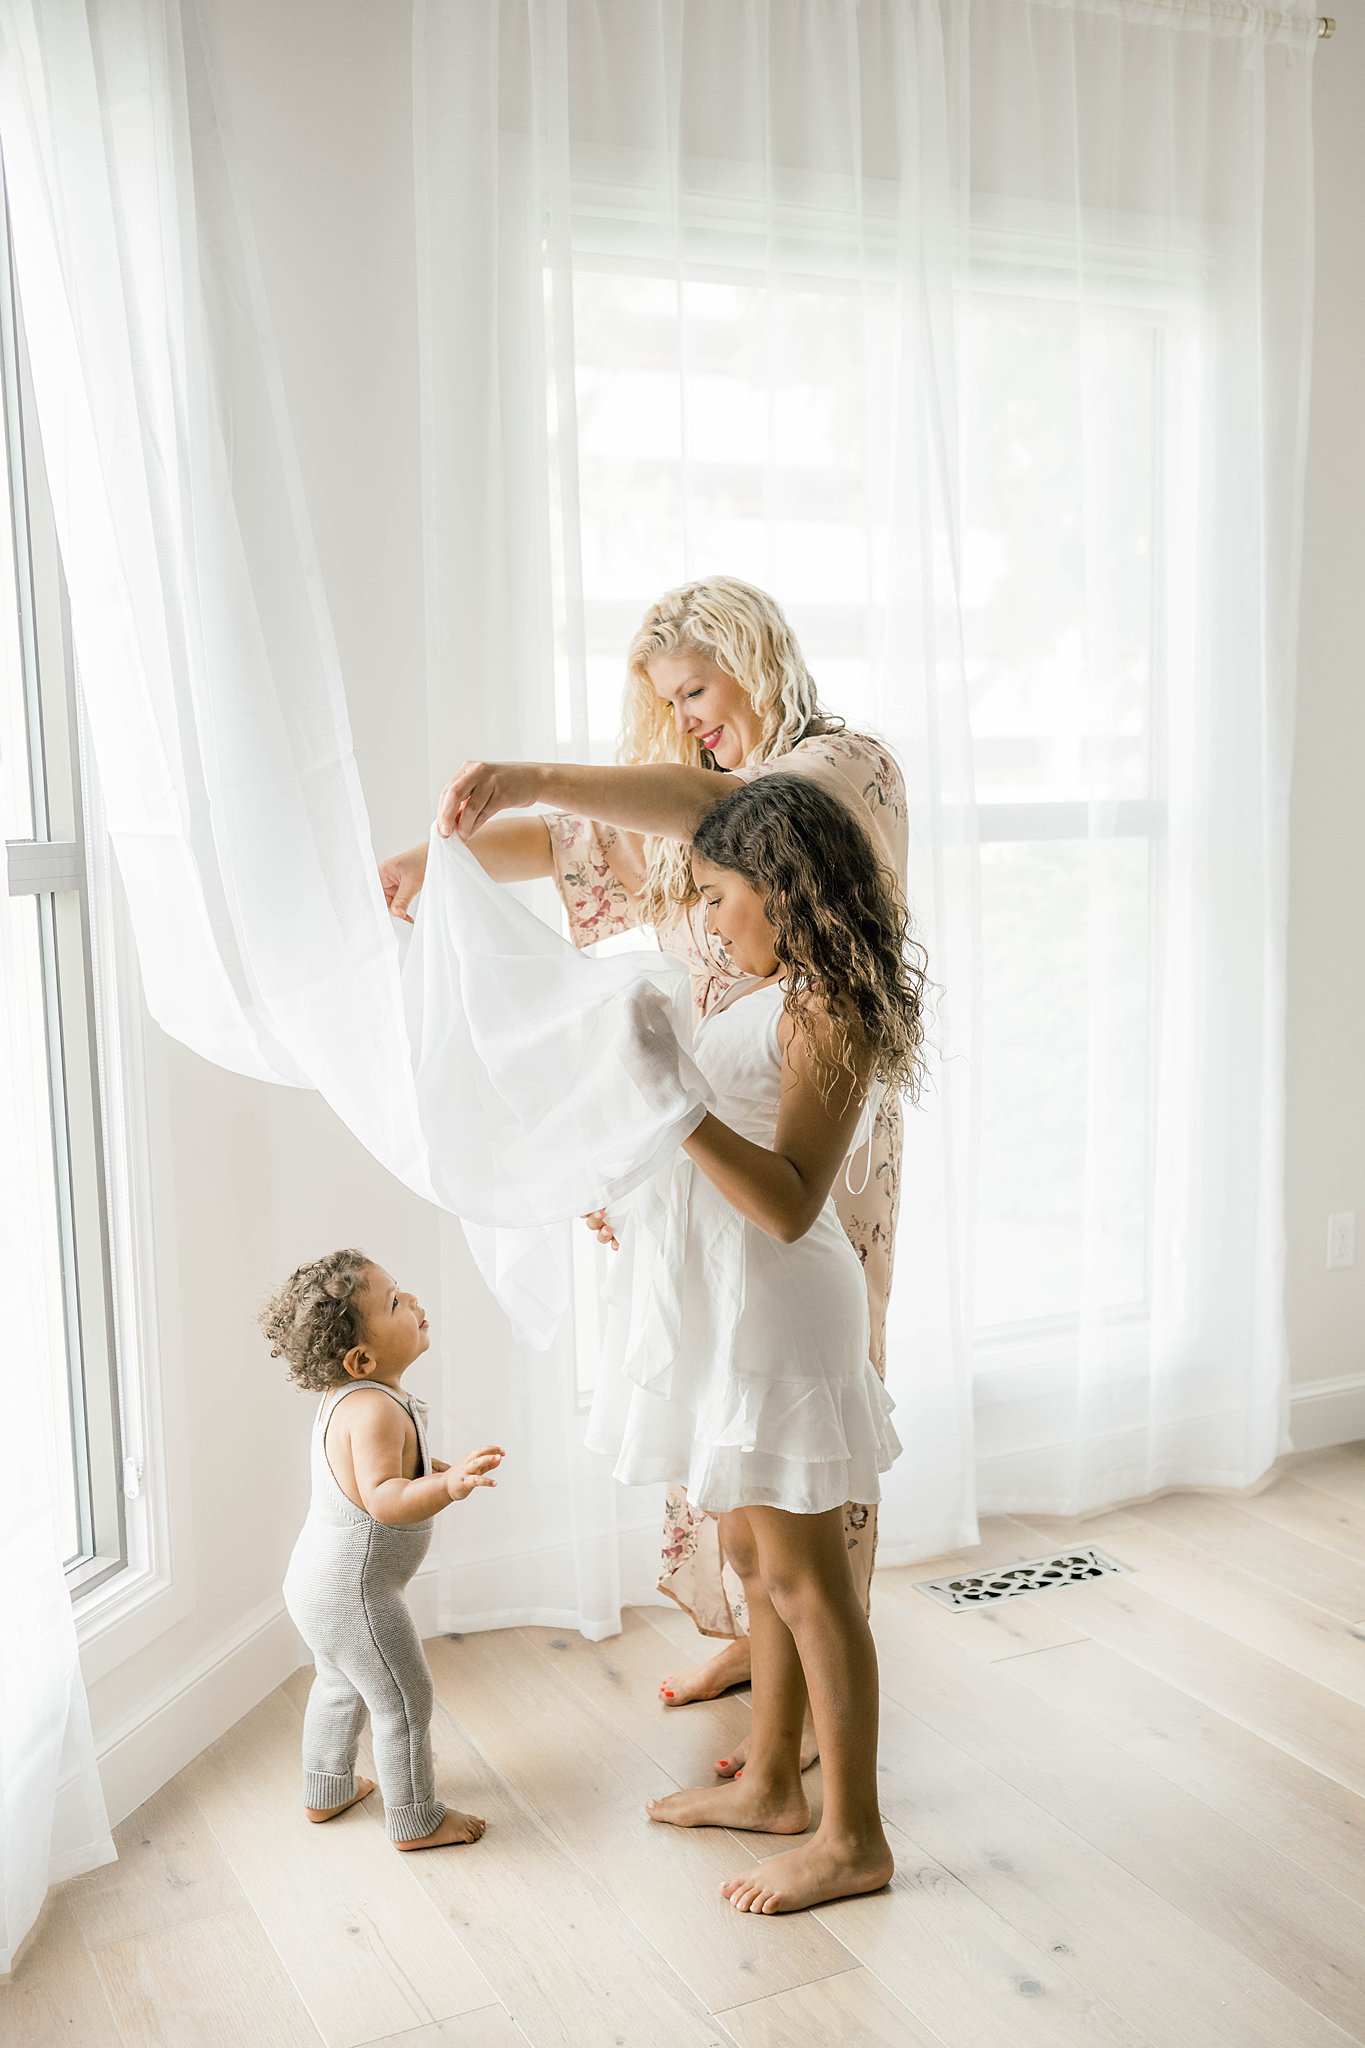 A mother plays in a window curtain with her toddler and young daughter